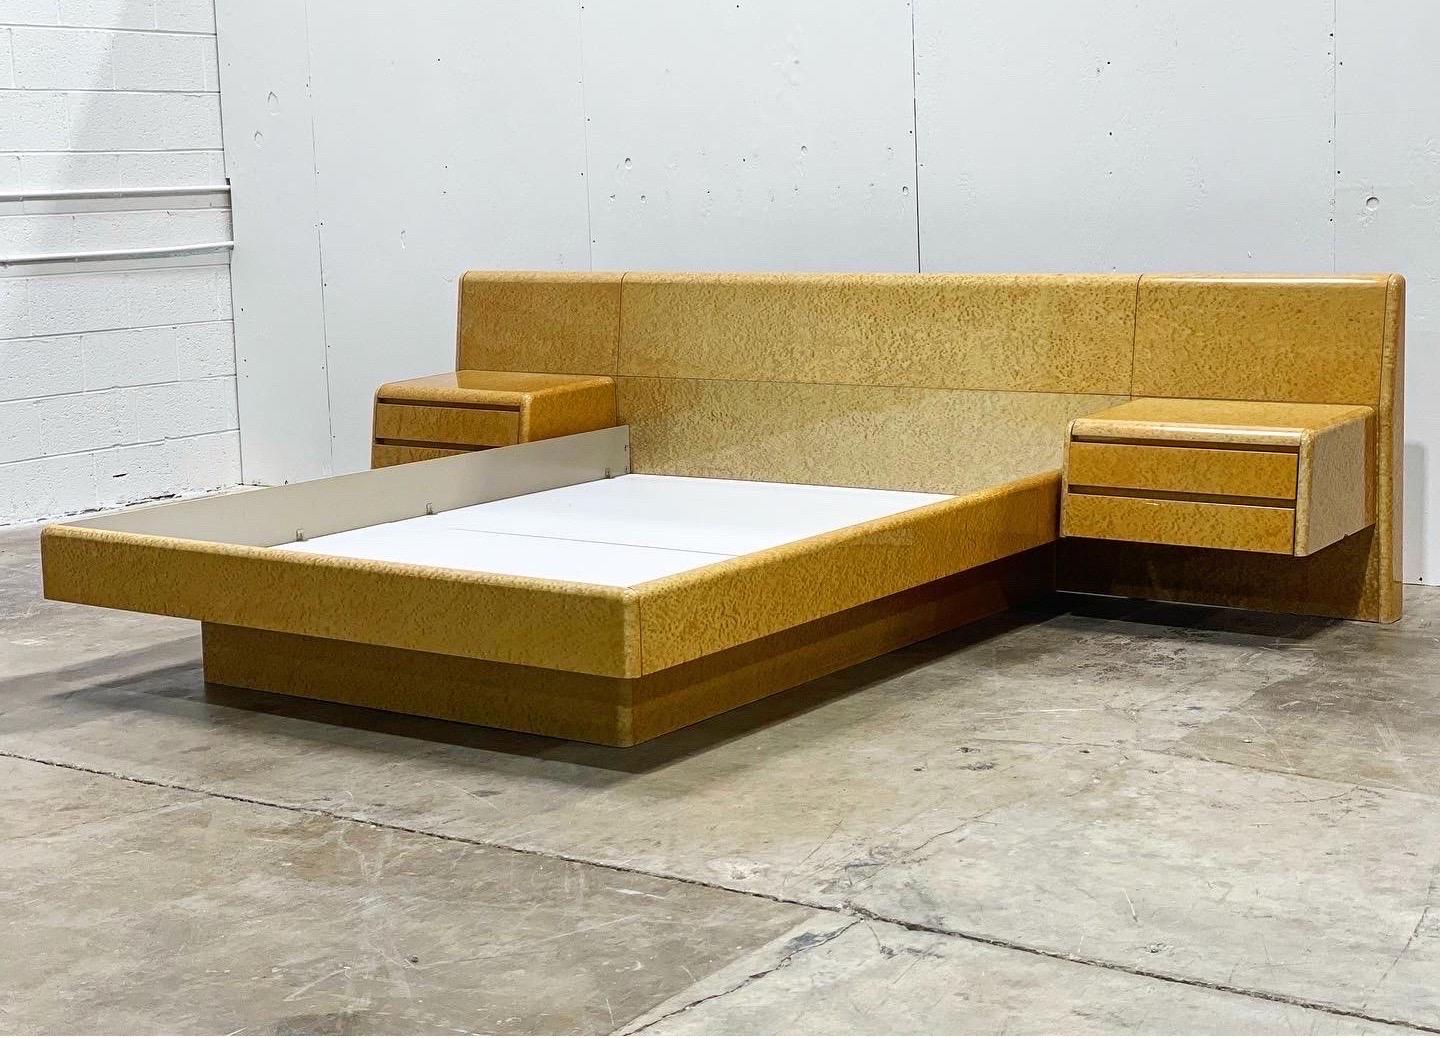 Unique on the market - exquisite post modern queen bedroom set by COMA, Italy circa 1978. Set consists of a queen platform bed with floating nightstands, a six drawer dresser and and gentleman's chest/armoire. Stunning lacquered birdseye maple.